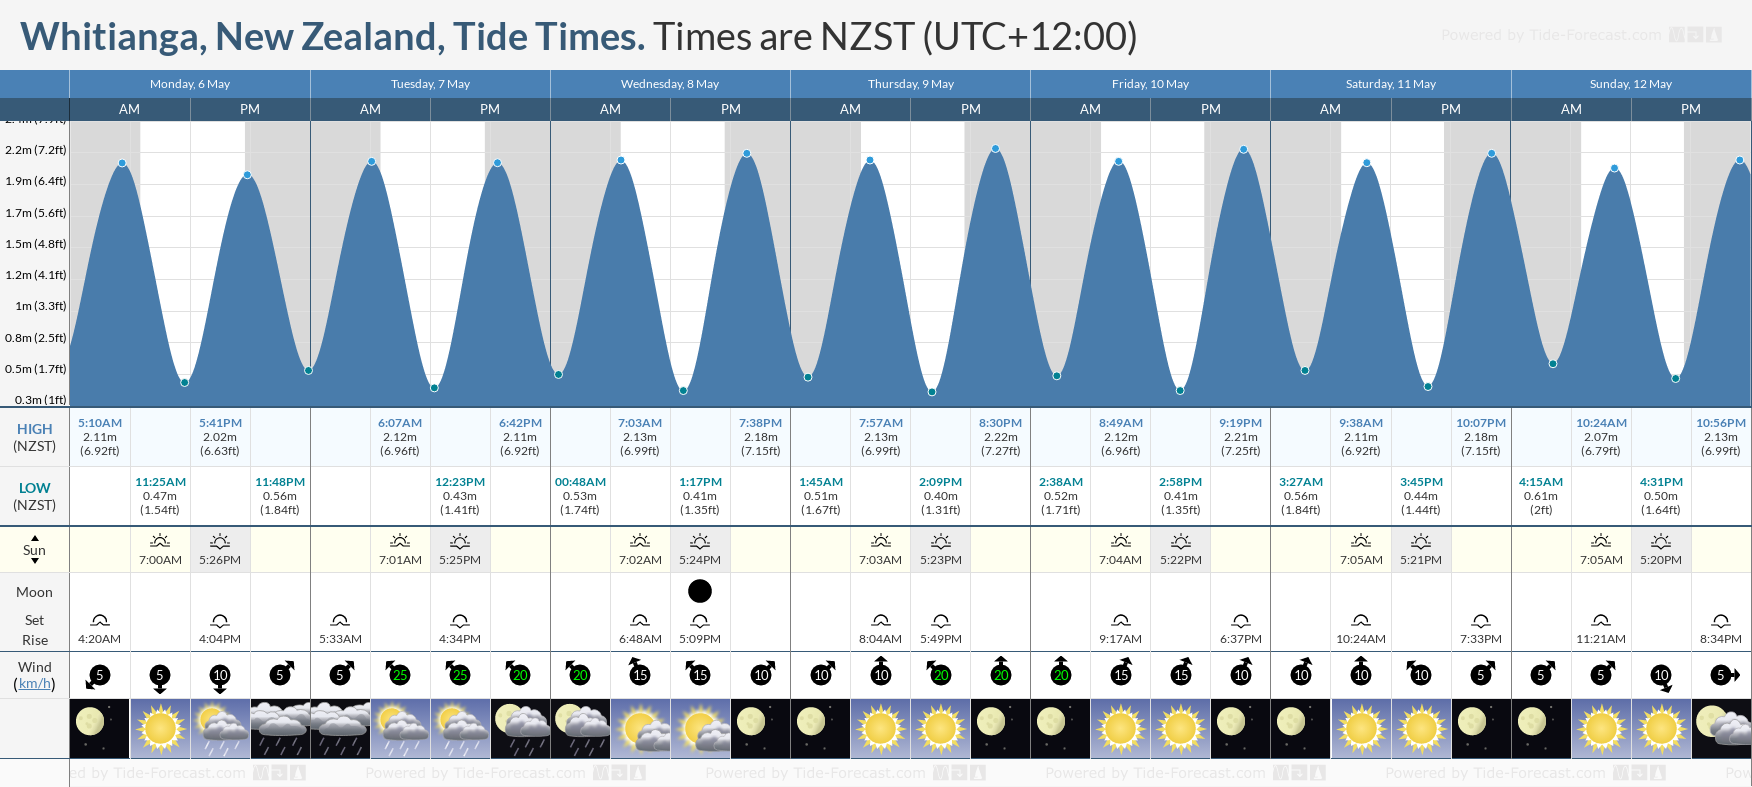 Whitianga, New Zealand Tide Chart including high and low tide tide times for the next 7 days